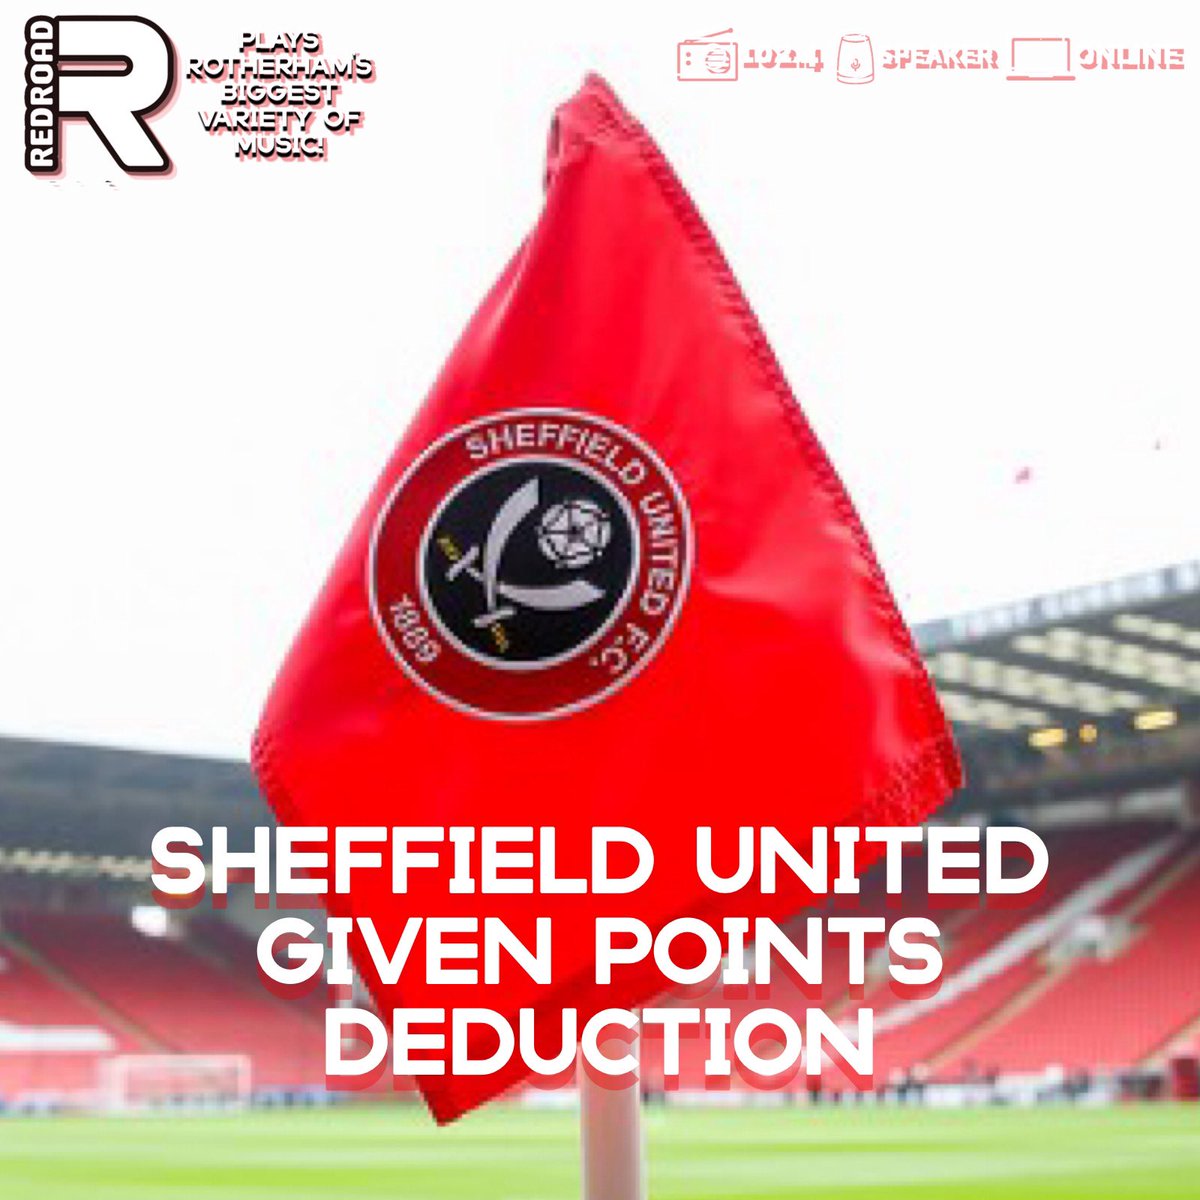 BREAKING | Sheffield United will start next season with 2 point deduction, with a further 2 points suspended, after defaulting on a number of payments in the 22/23 season. #SUFC #twitterblades